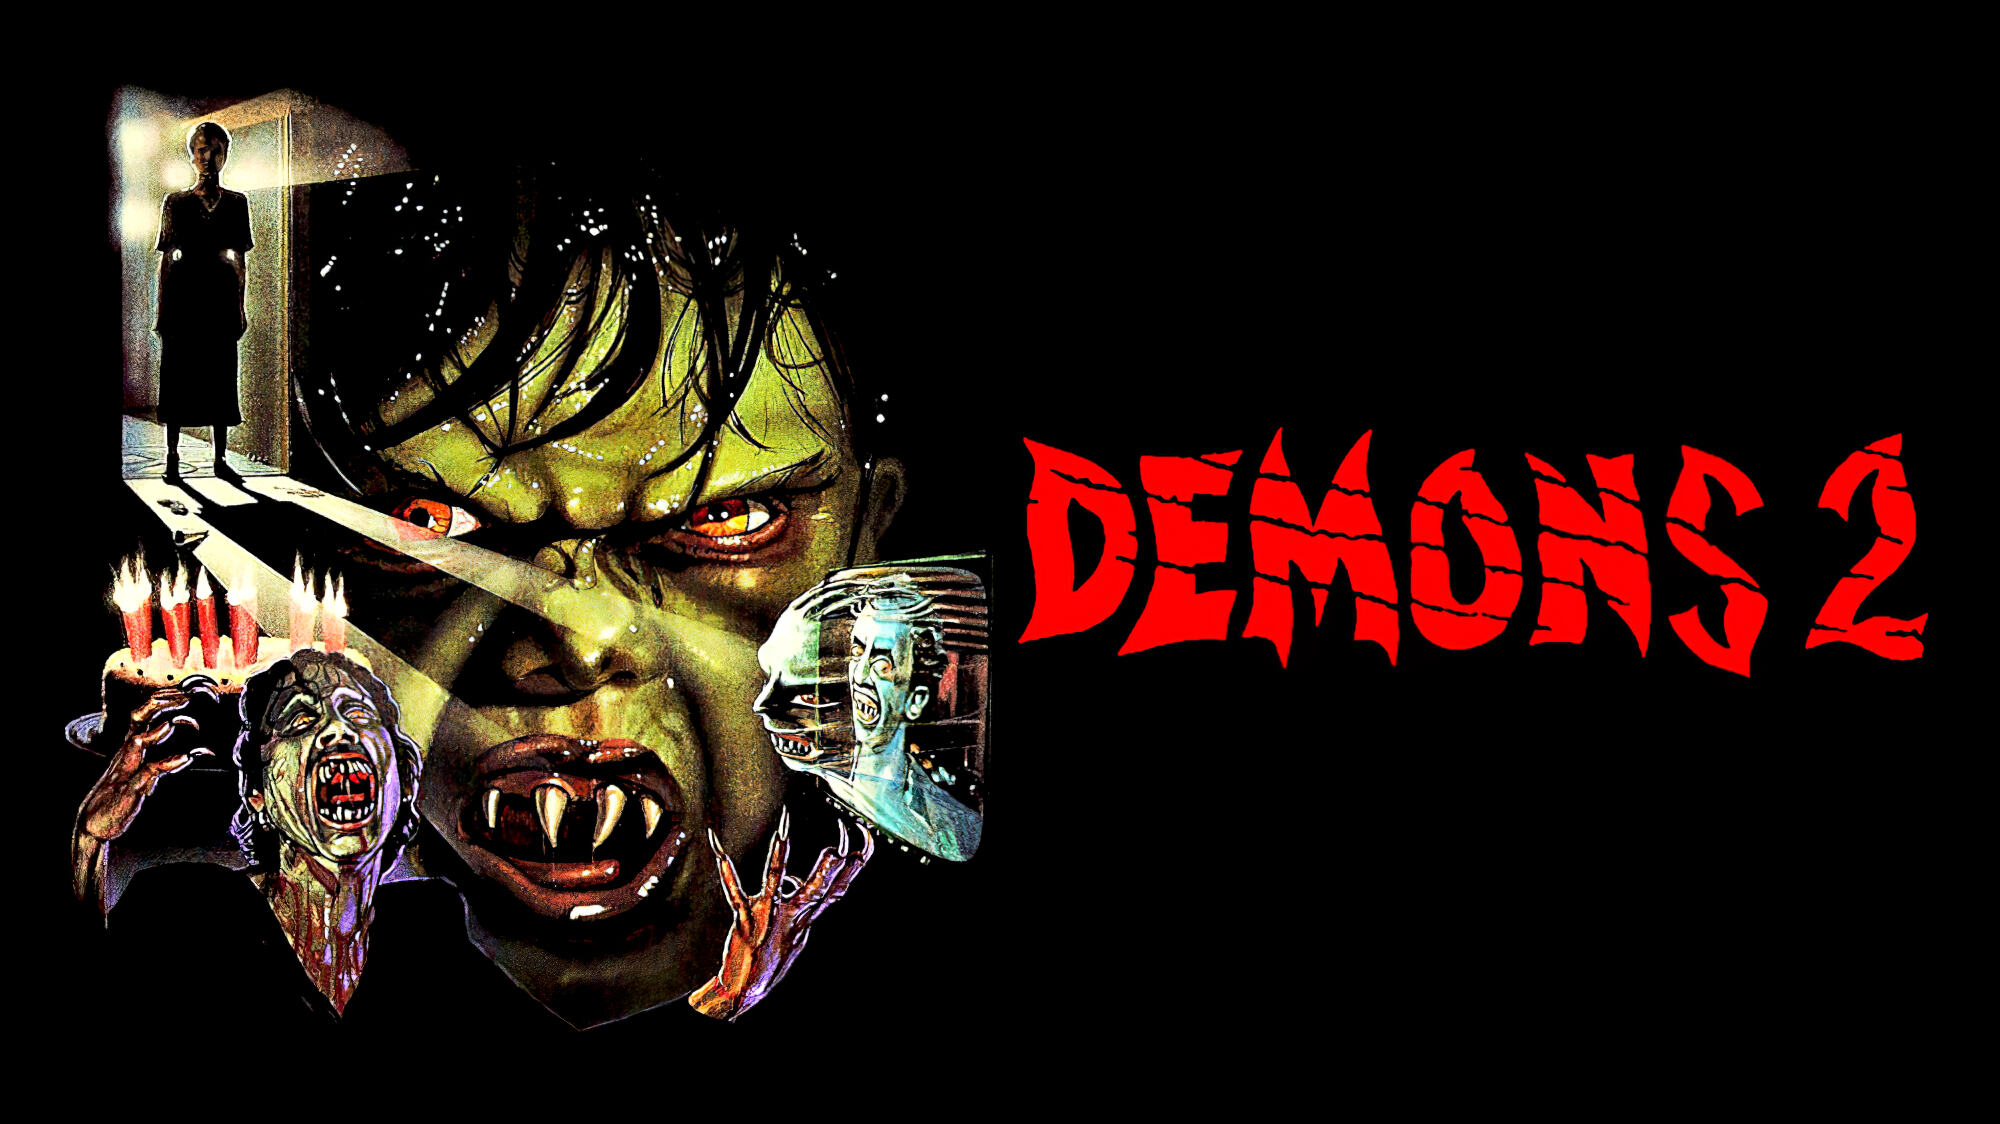 47-facts-about-the-movie-demons-2